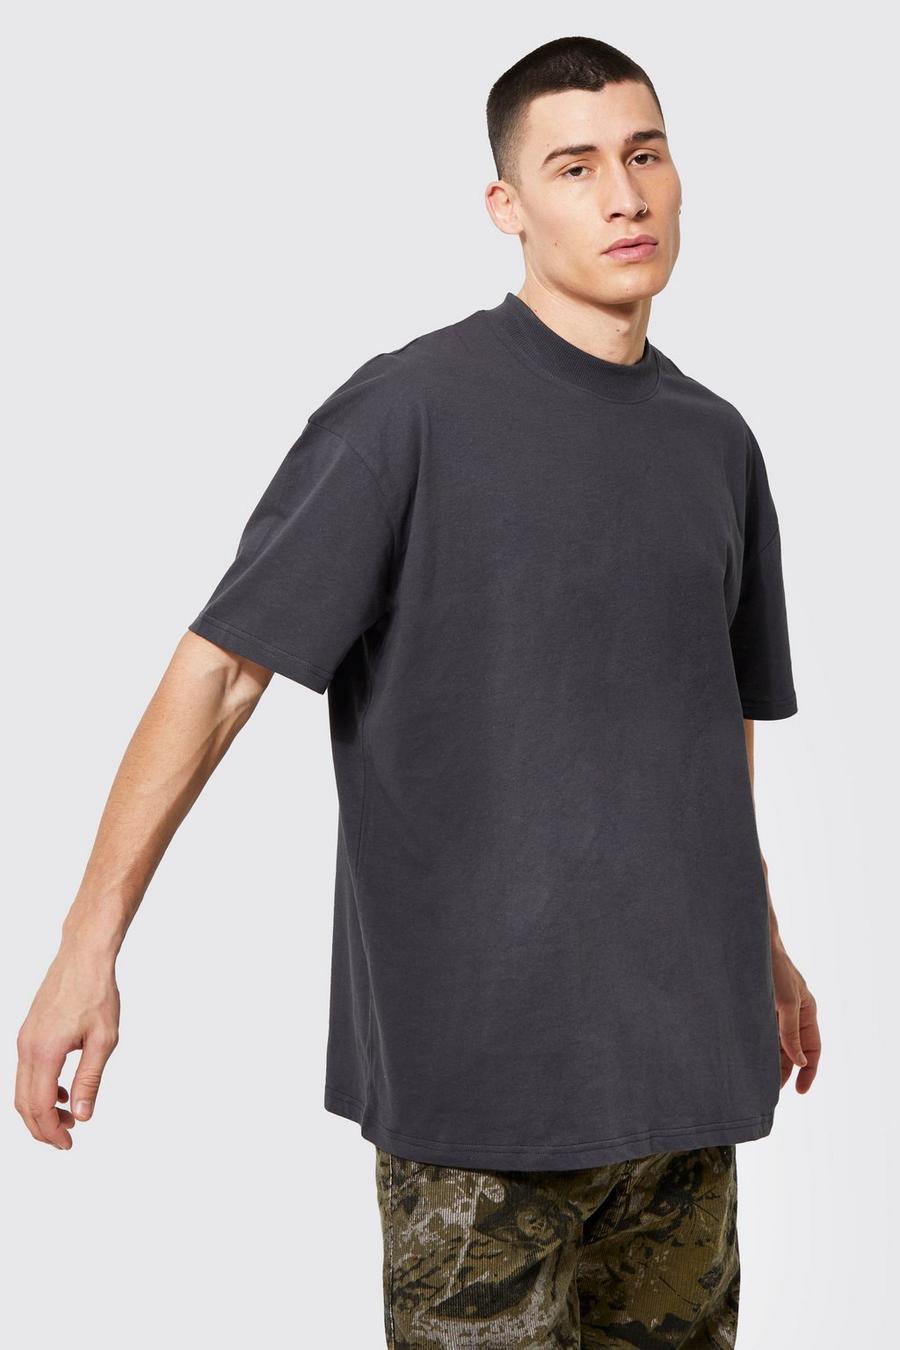 Charcoal grey REEL Cotton Oversized Extended Neck T-shirt